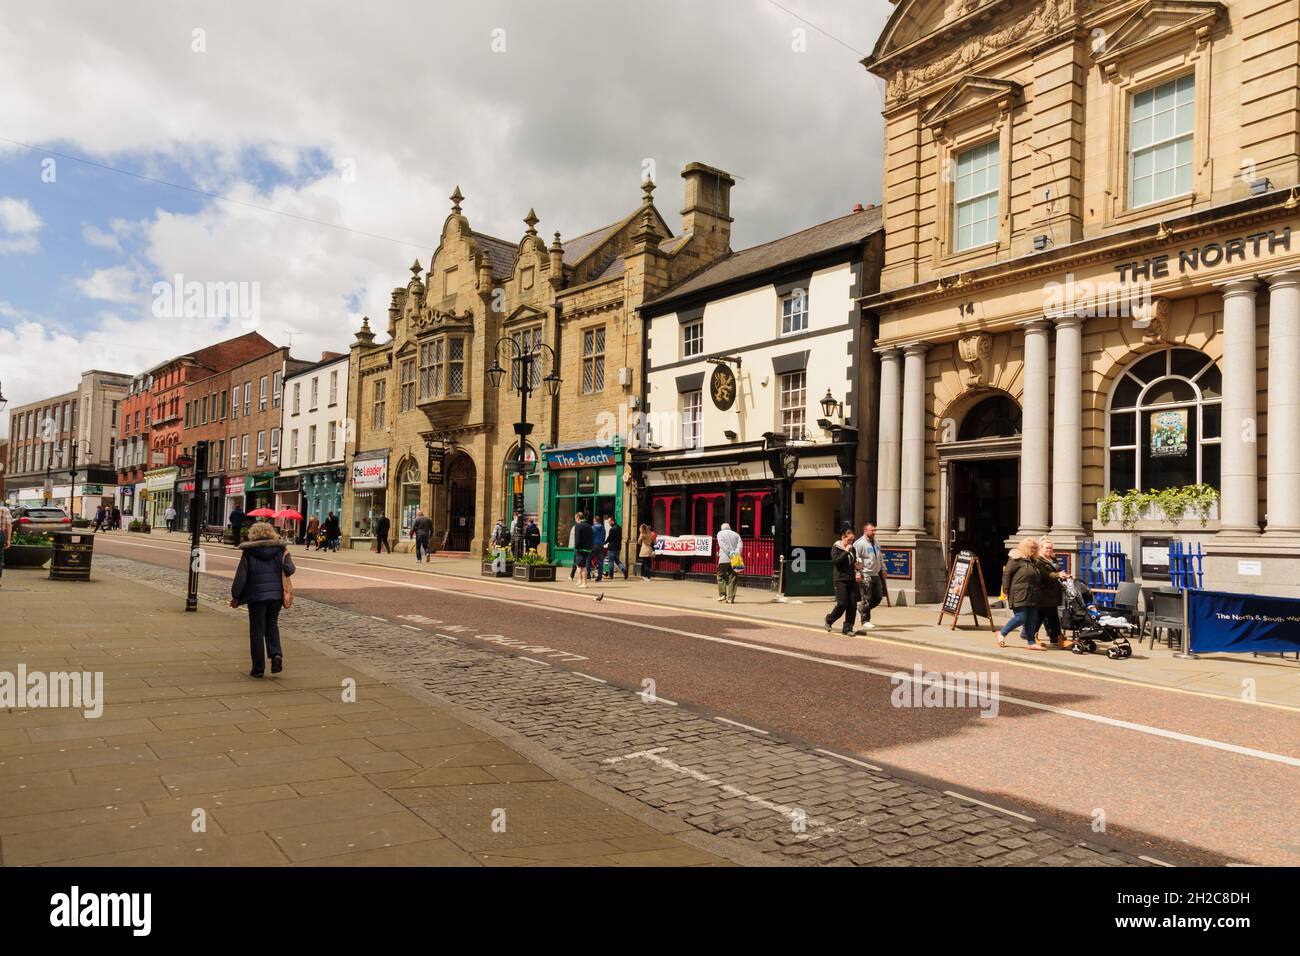 The High Street in Wrexham town centre showing its varied period buildings including the entrance to the indoor market and Golden Lion pub Stock Photo